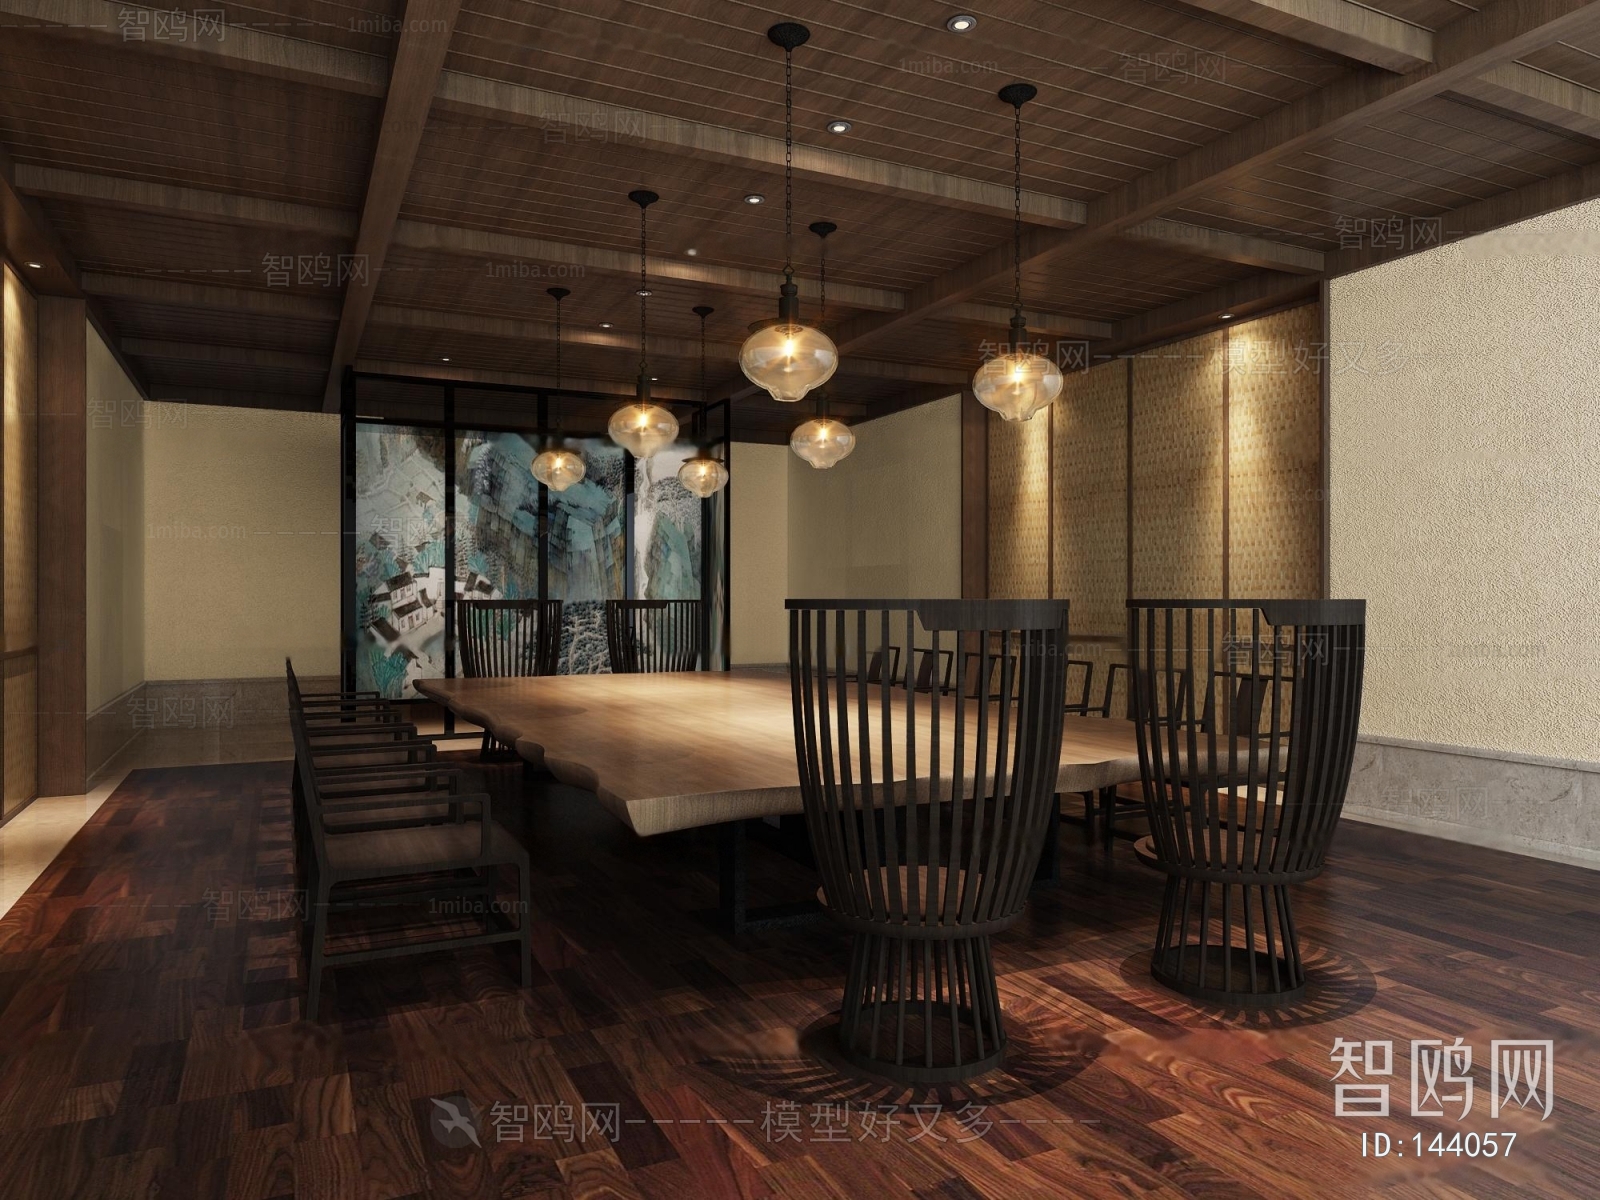 New Chinese Style Reception Area